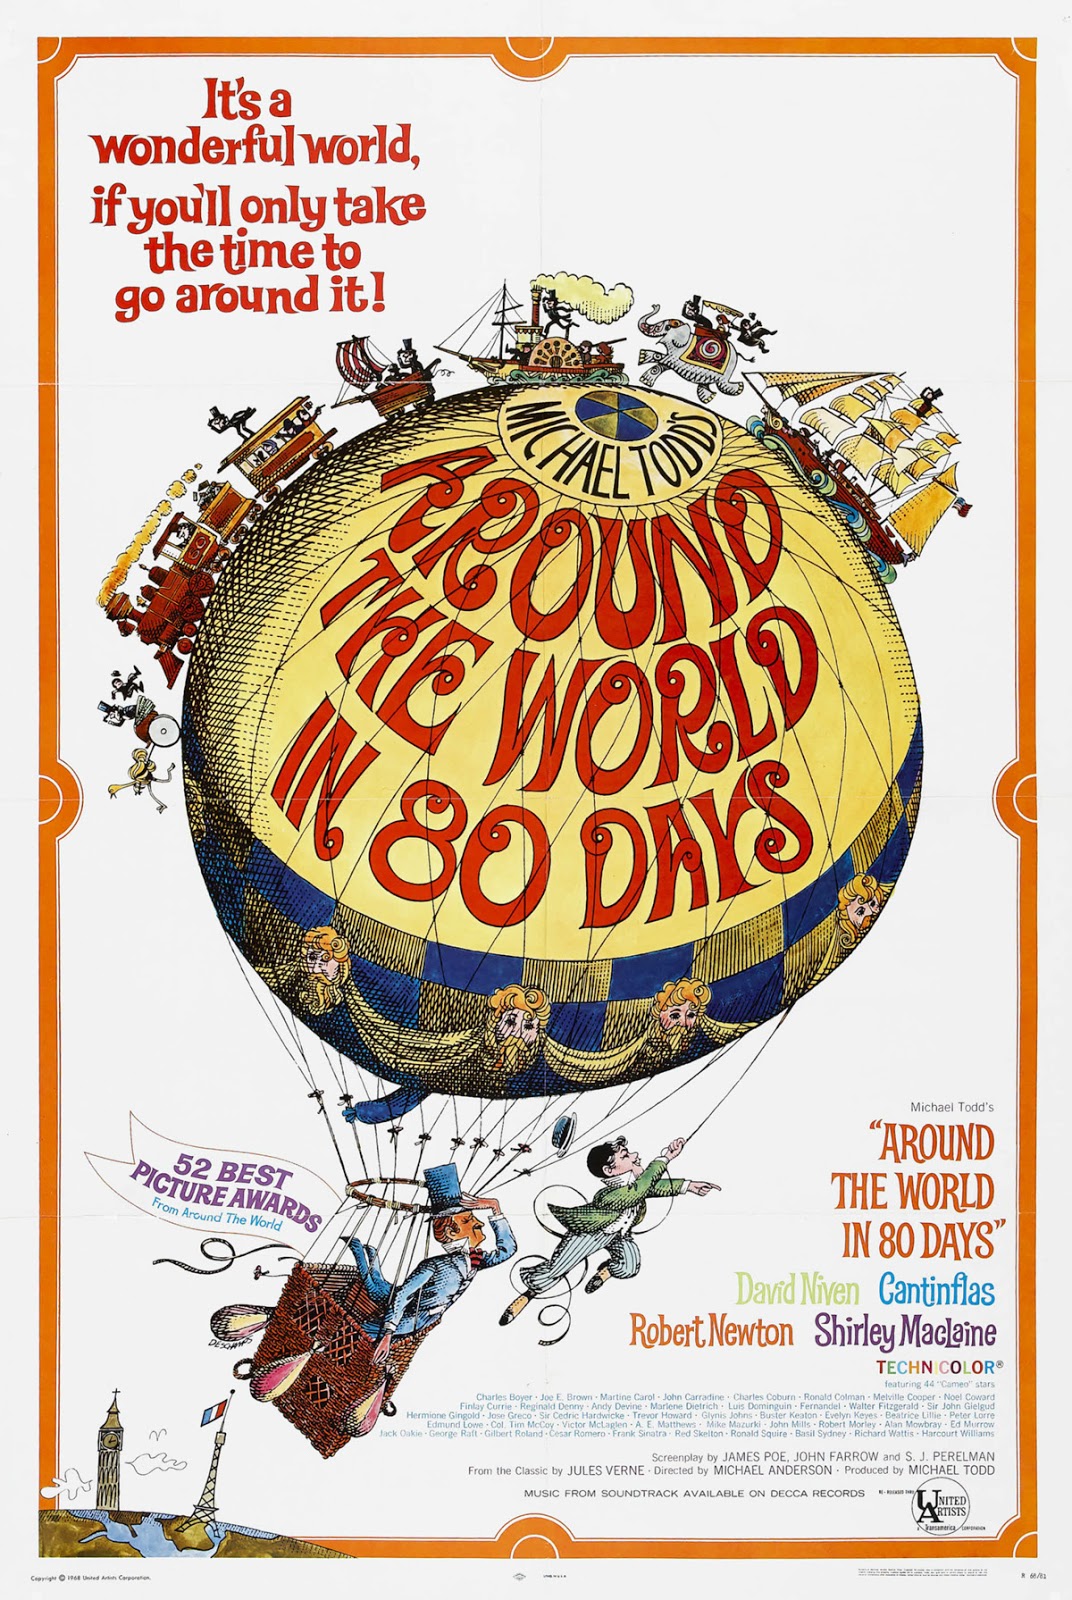 Movie Review: "Around the World in 80 Days" (1956) | Lolo Loves Films